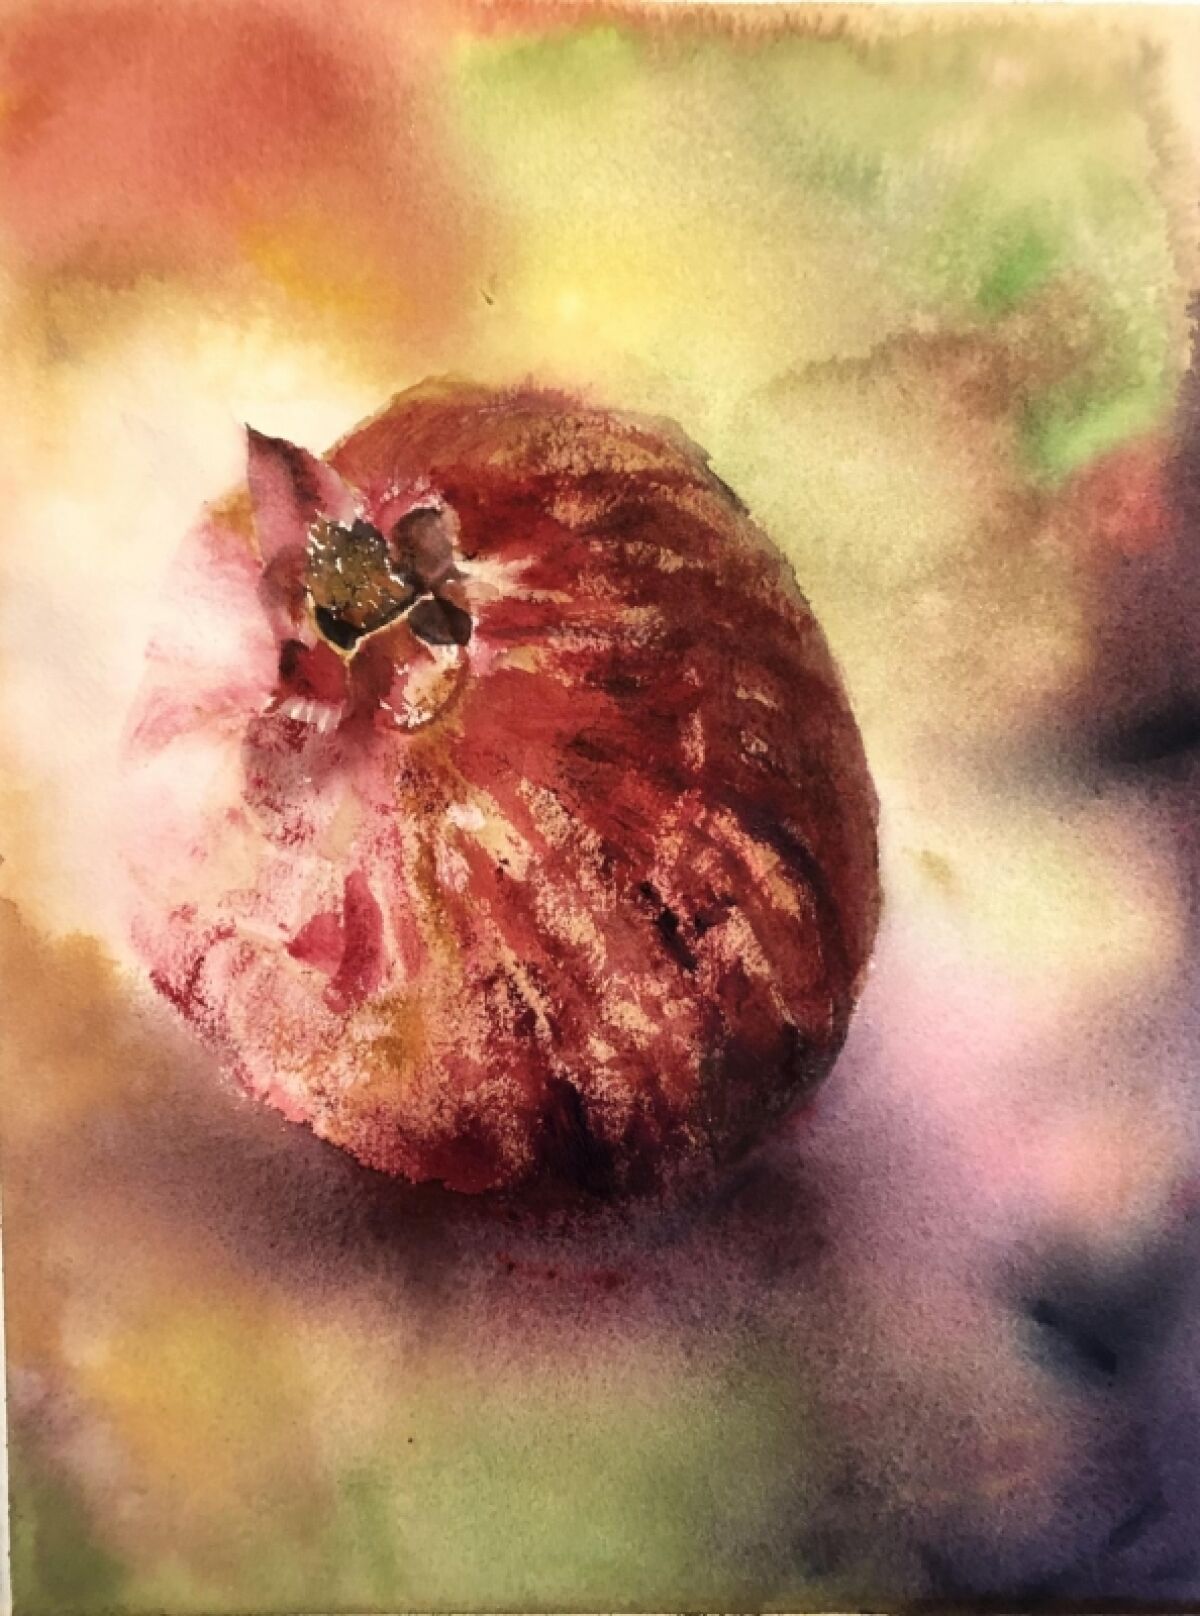 “Heavenly Fruit” by Nancy Phillips took third place in the San Diego Watercolor Society's February Members Exhibition.